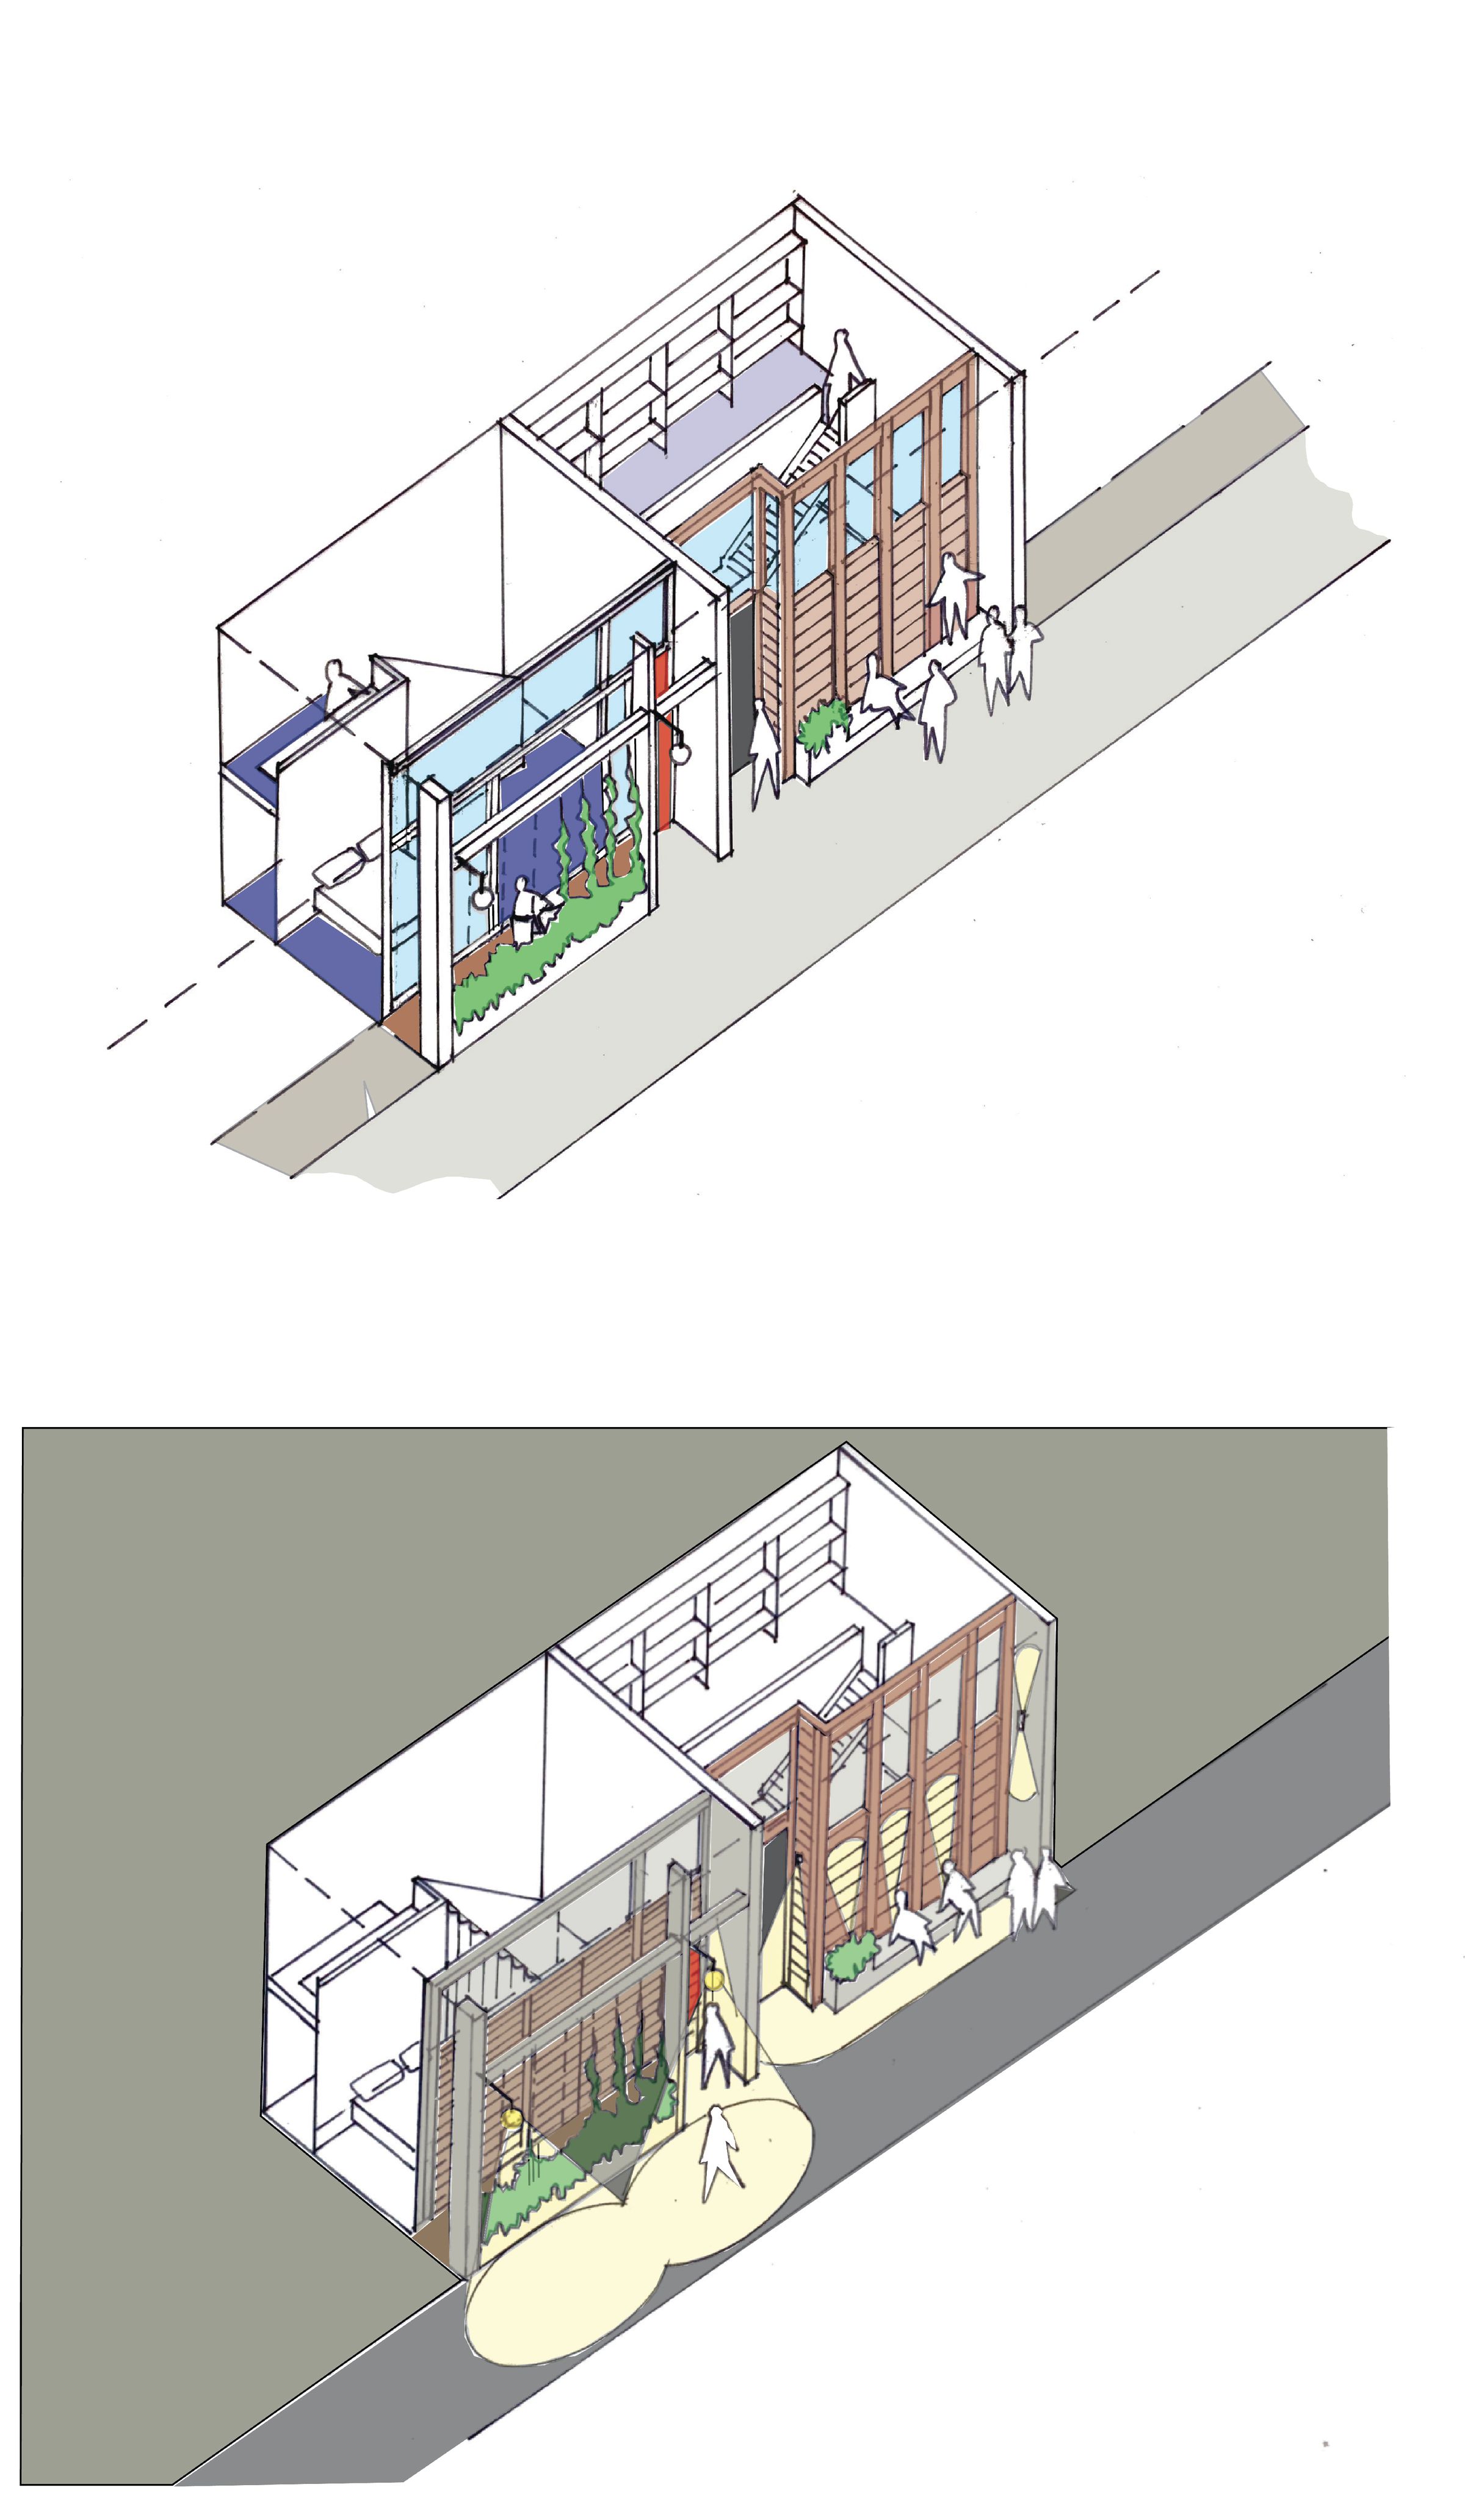 Illustrations of re-imagined frontages for the Forest Hill Precinct. There are two illustrations, one showing the re-imagined frontage during the day and one at night. The frontage shows greening, operable shading, seating and integrated lighting.